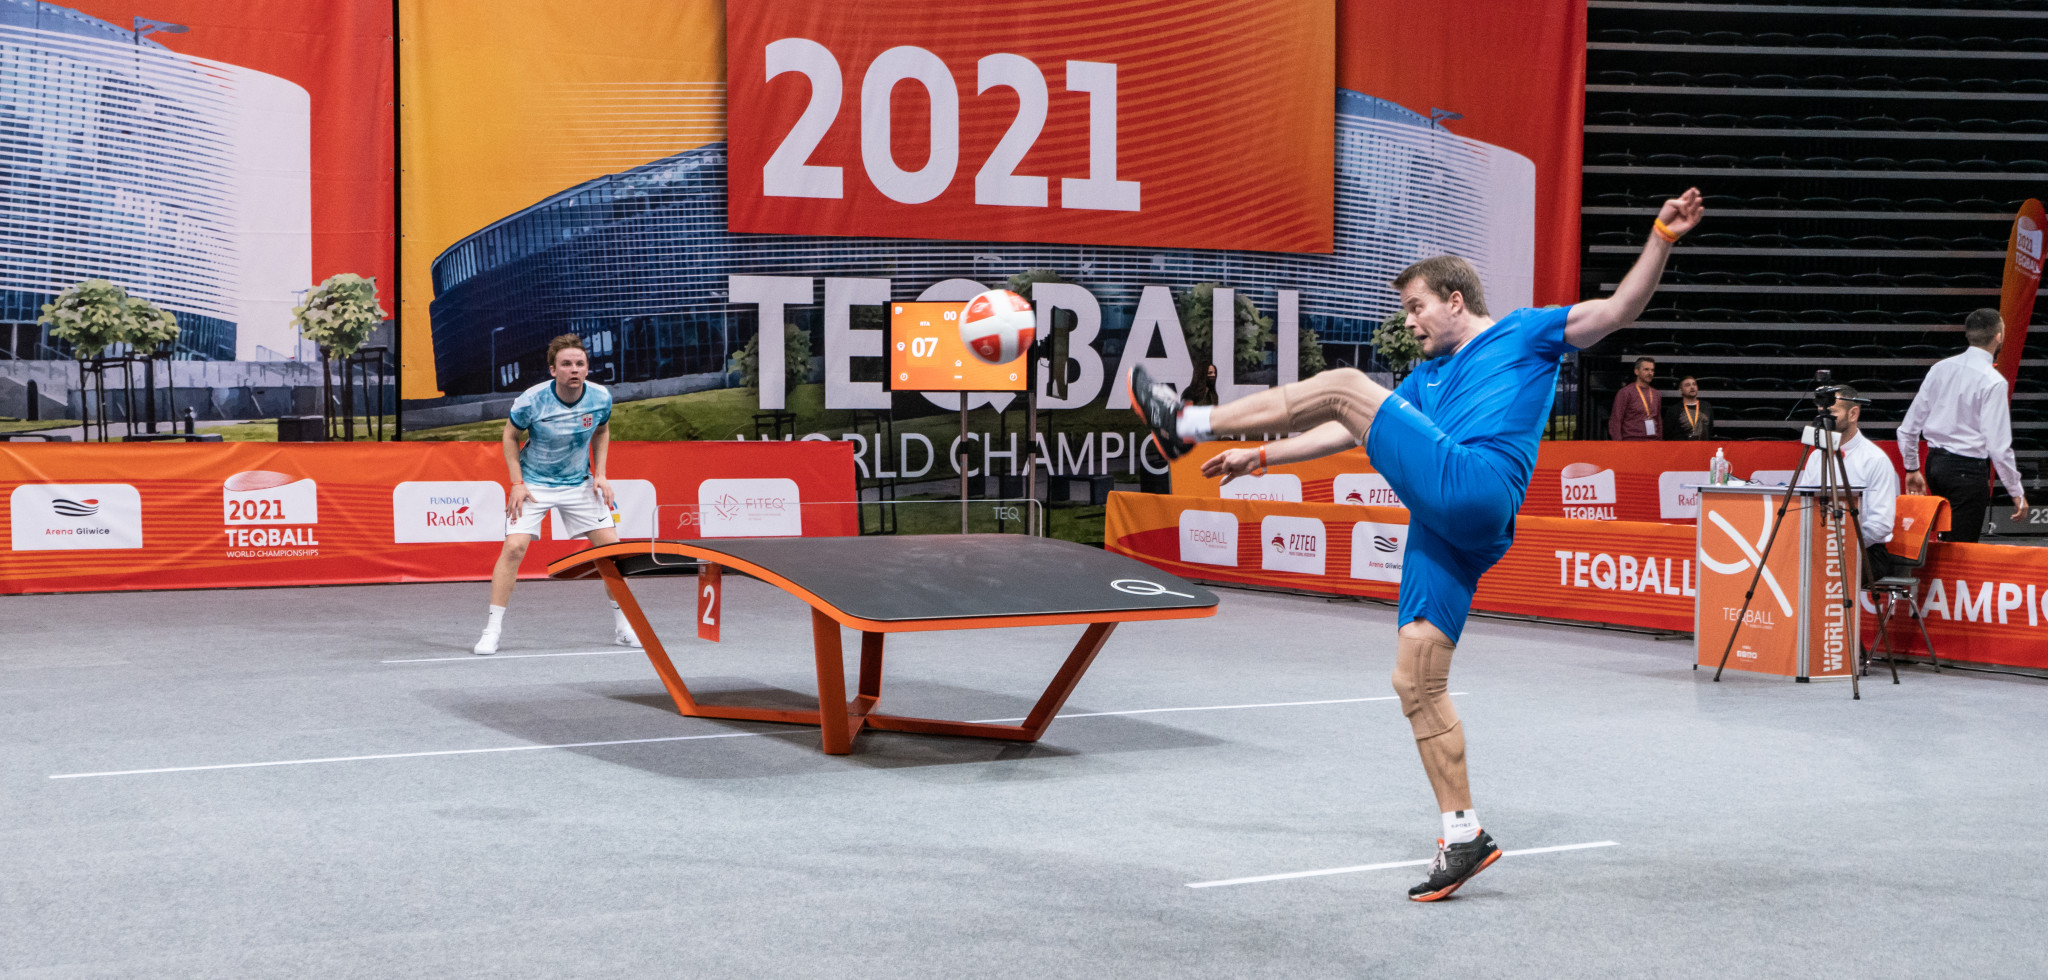 Norway's Jonathan Olsen and "neutral" Russian Teqball Athlete Kirill Zemskov met in the men's singles group stage ©FITEQ